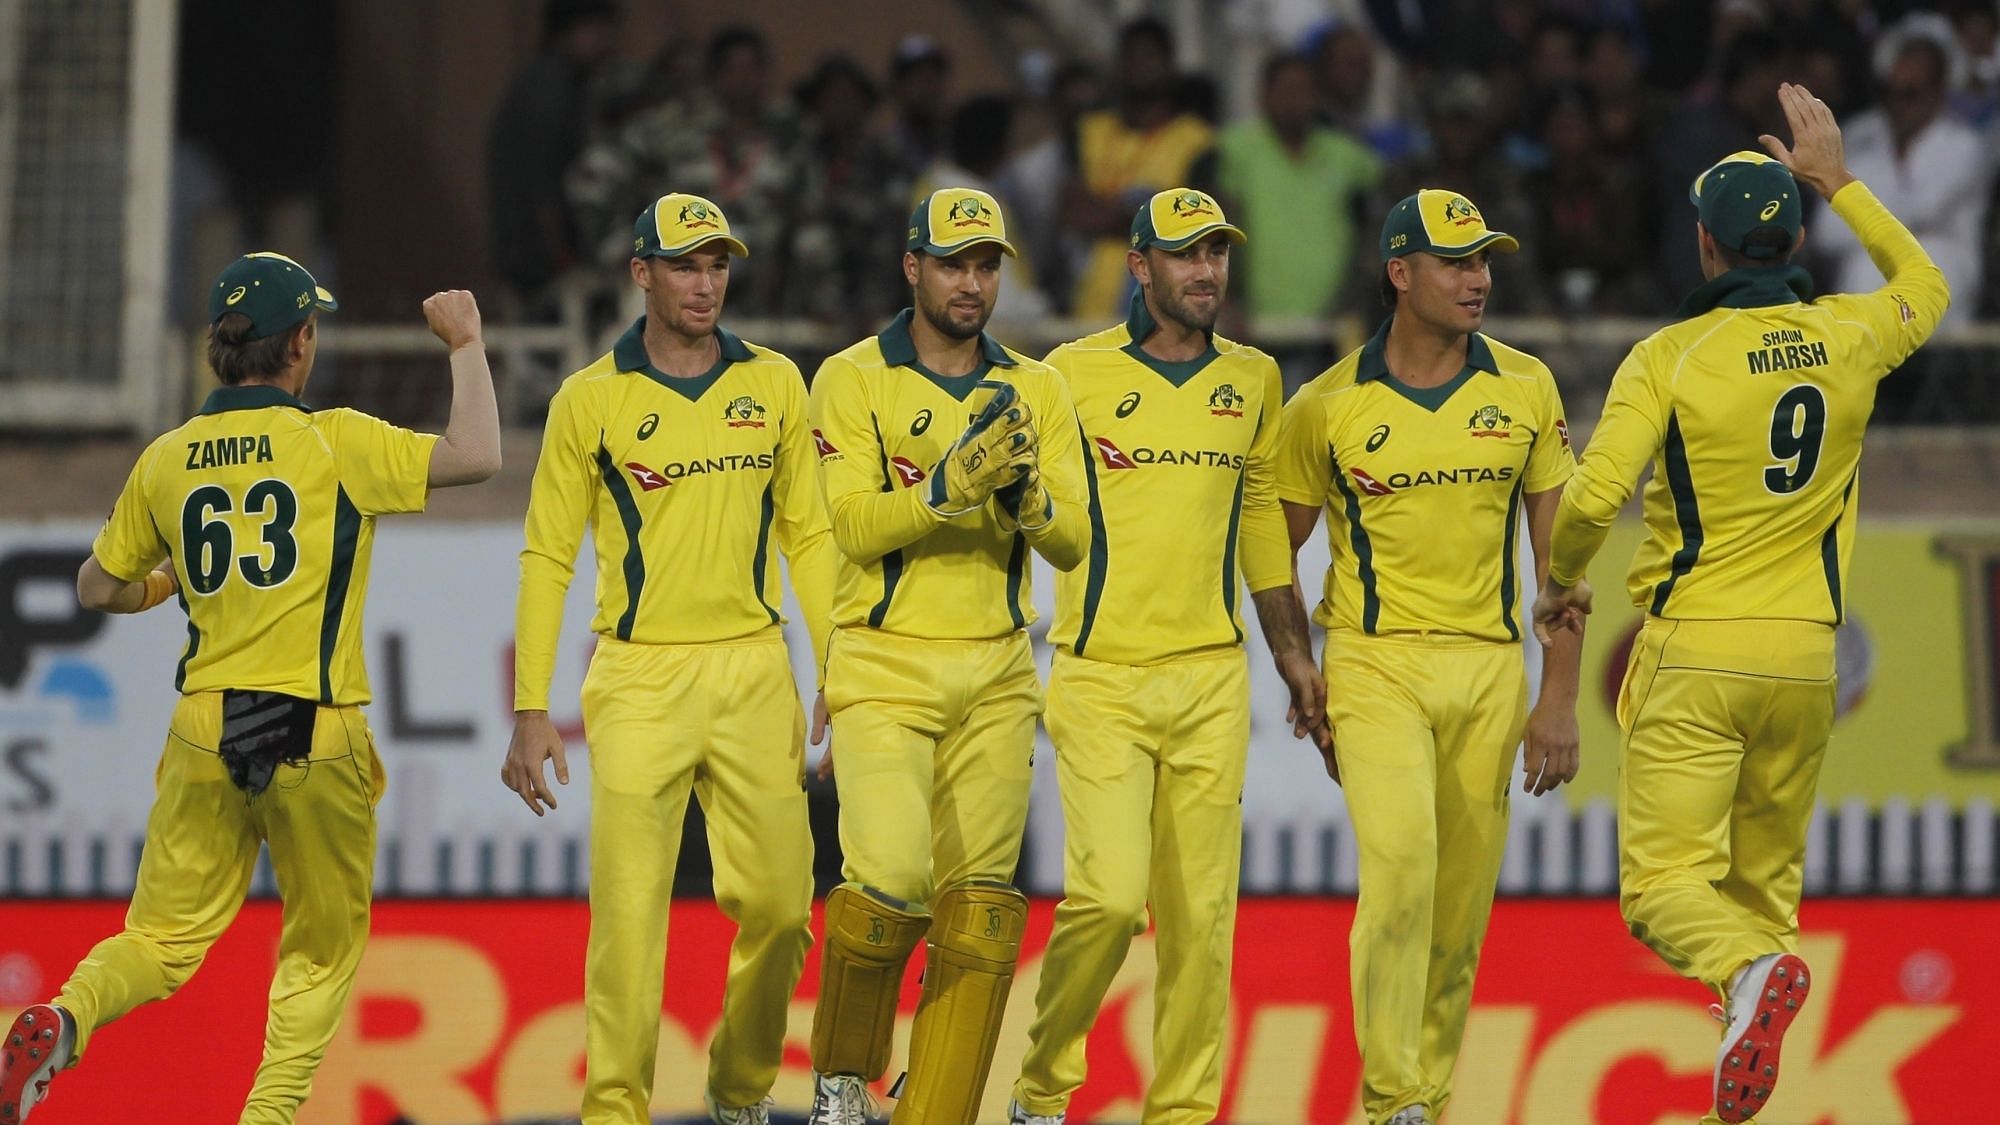 Australia beat India by 32 runs to keep the five-match ODI series alive.